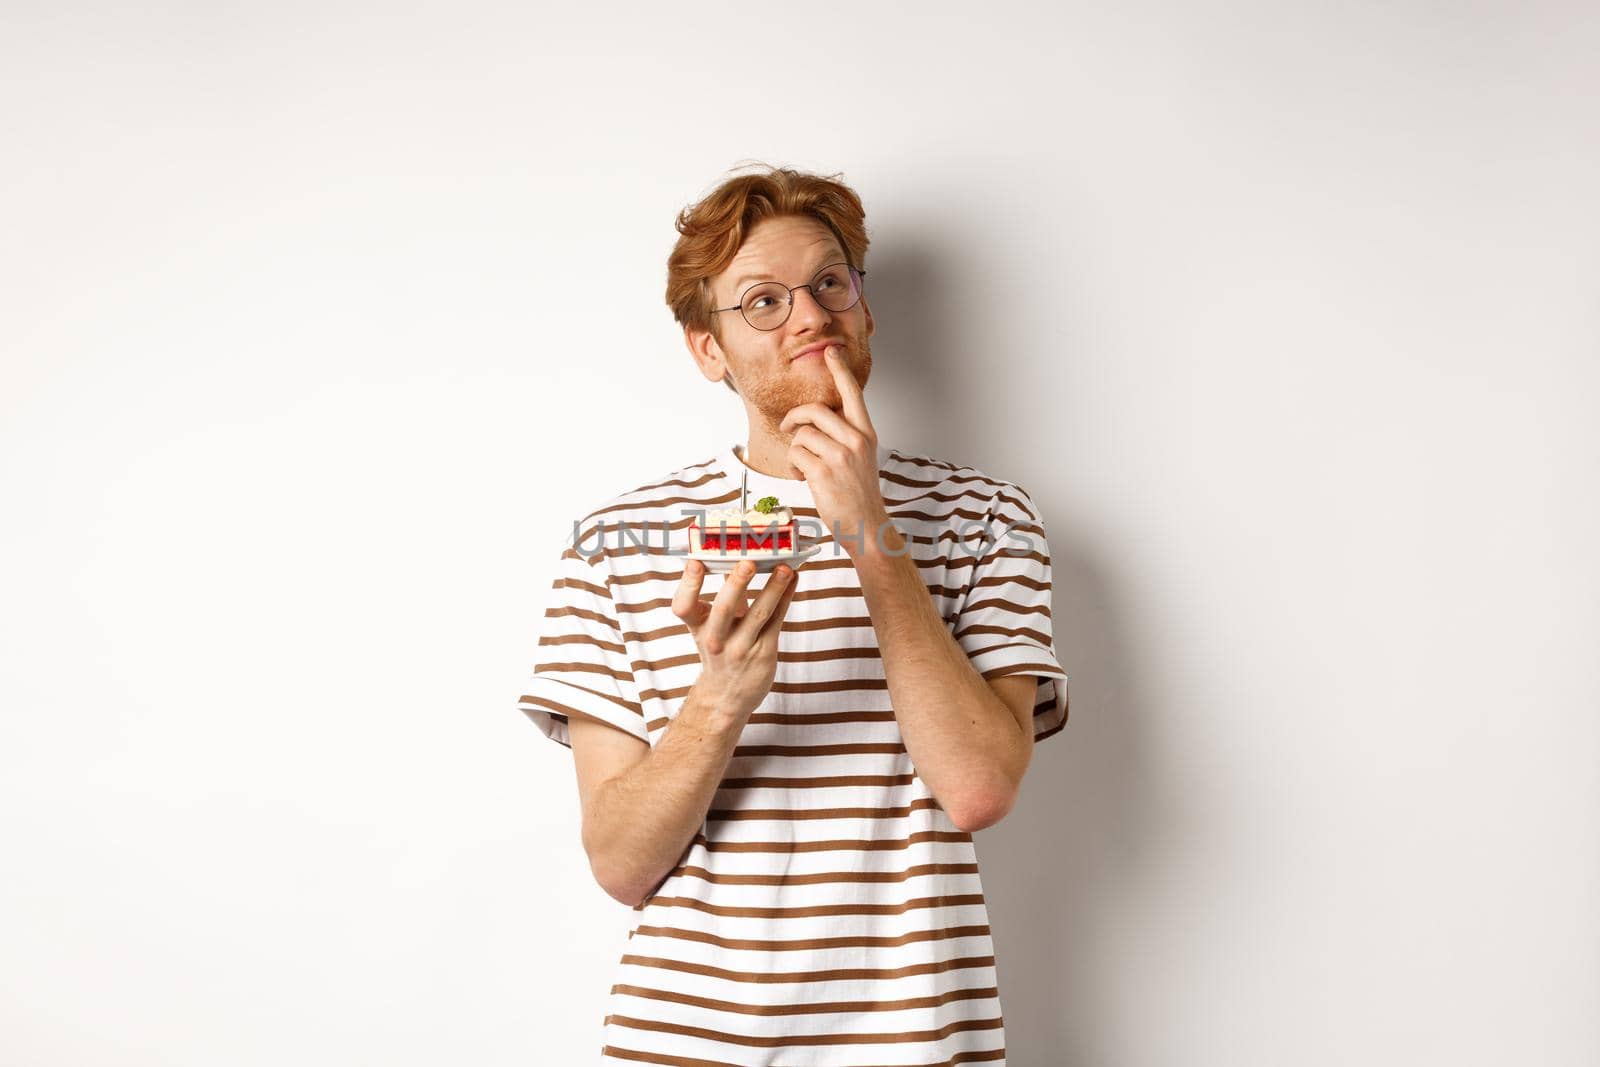 Holidays and celebration concept. Happy young man with red hair and glasses having birthday, holding cake with candle and thinking of b-day wish, standing over white background.